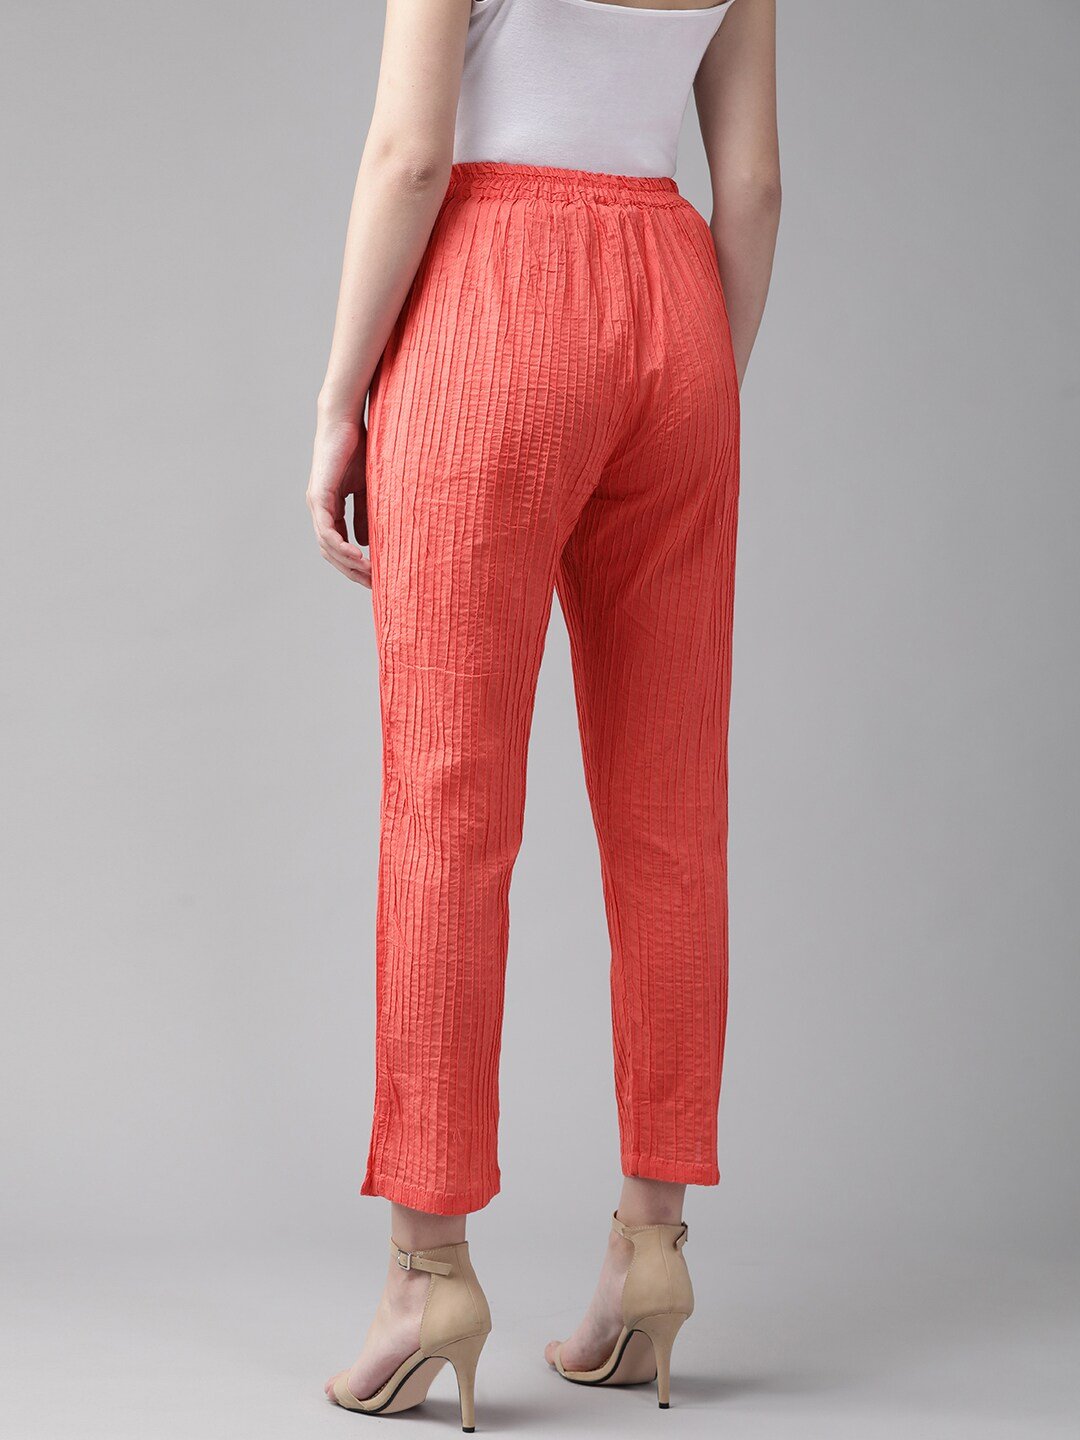 Women's  Peach-Coloured Regular Fit Solid Regular 3/4Th Trousers - AKS